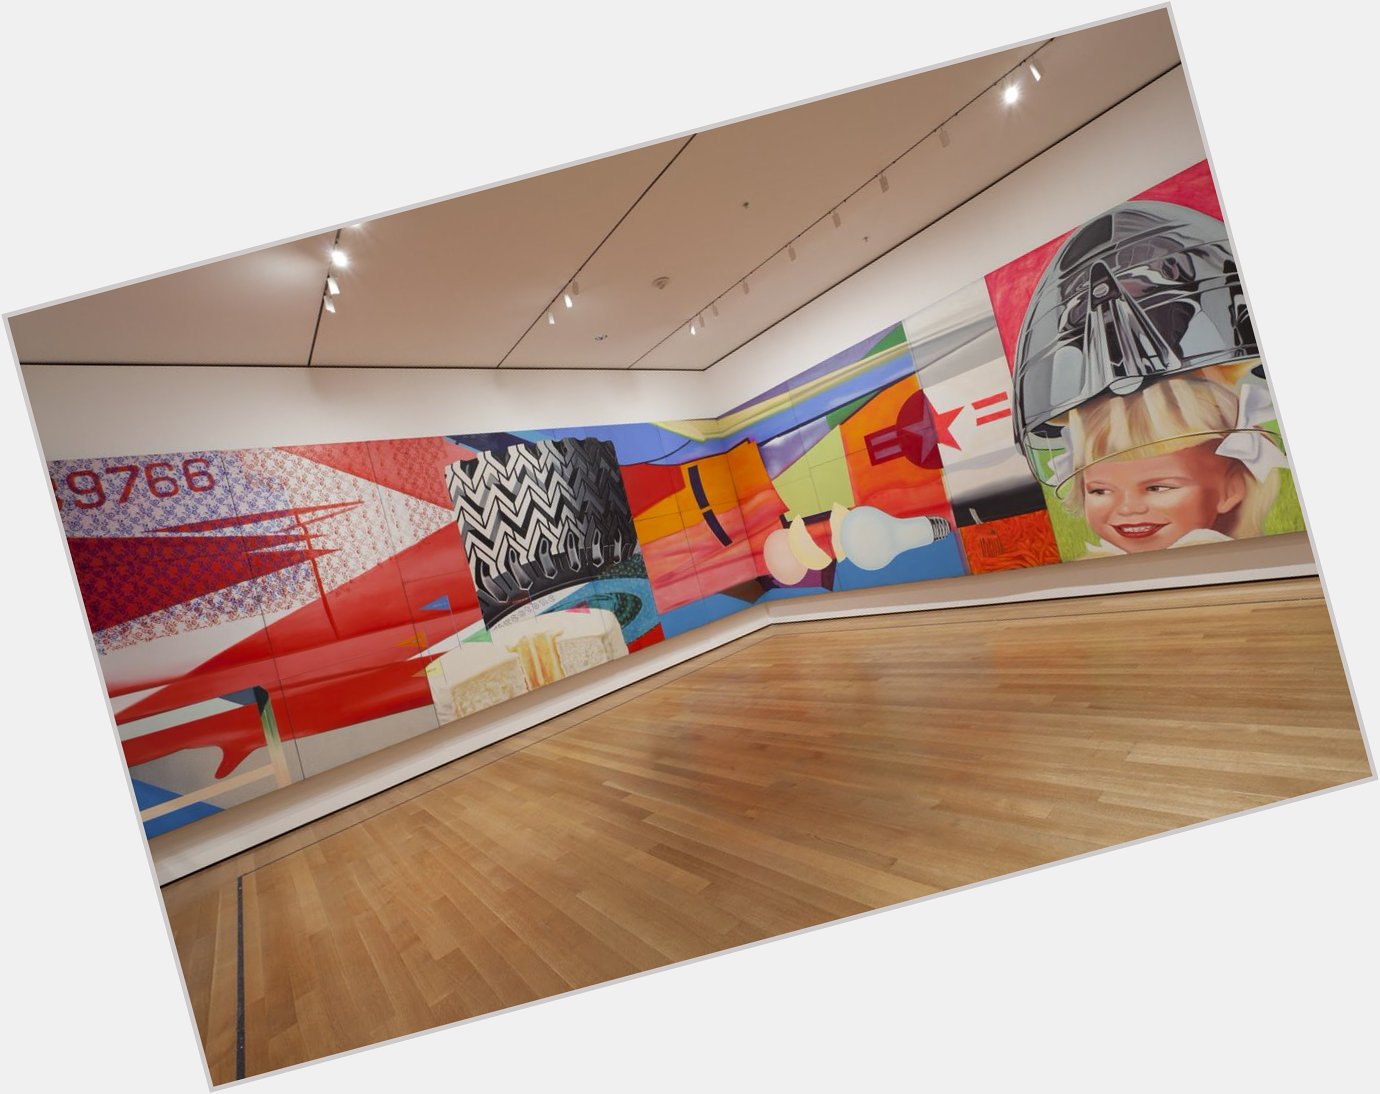 James Rosenquist\s 86-foot long \"F-111\" reflects on war culture and consumer society. Happy Birthday, James! 